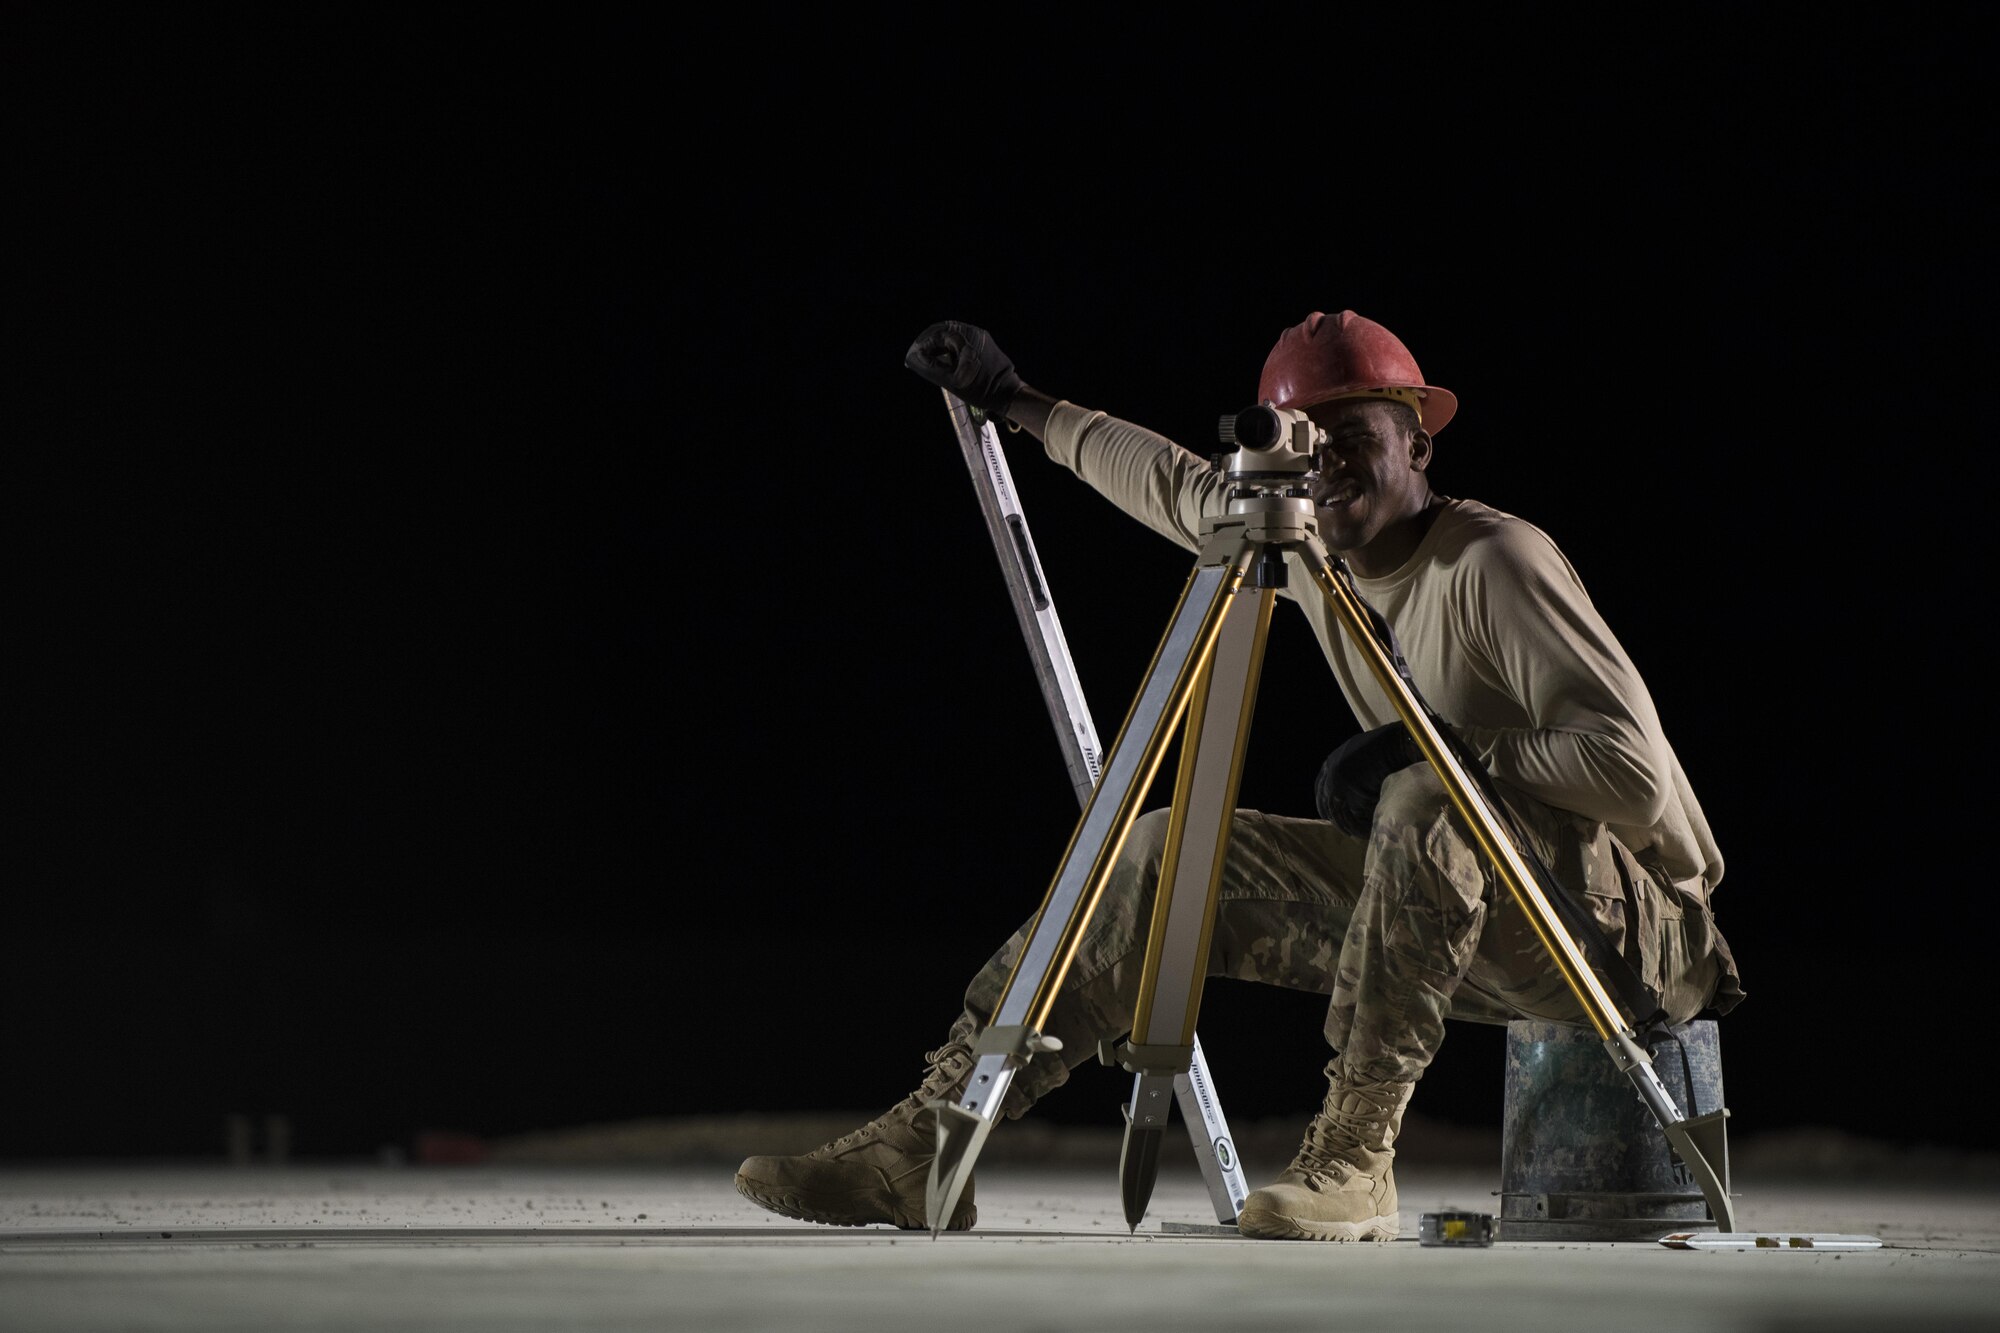 Staff Sgt. Jackie Timmons, 557th Expeditionary RED HORSE structural craftsman, adjusts a laser level to ensure construction is started on the proper elevation June 27, 2017, in Southwest Asia. The squadron provides engineering services throughout the Air Force Central Command area of responsibility, inside and outside the wire. (U.S. Air Force photo/Senior Airman Damon Kasberg)